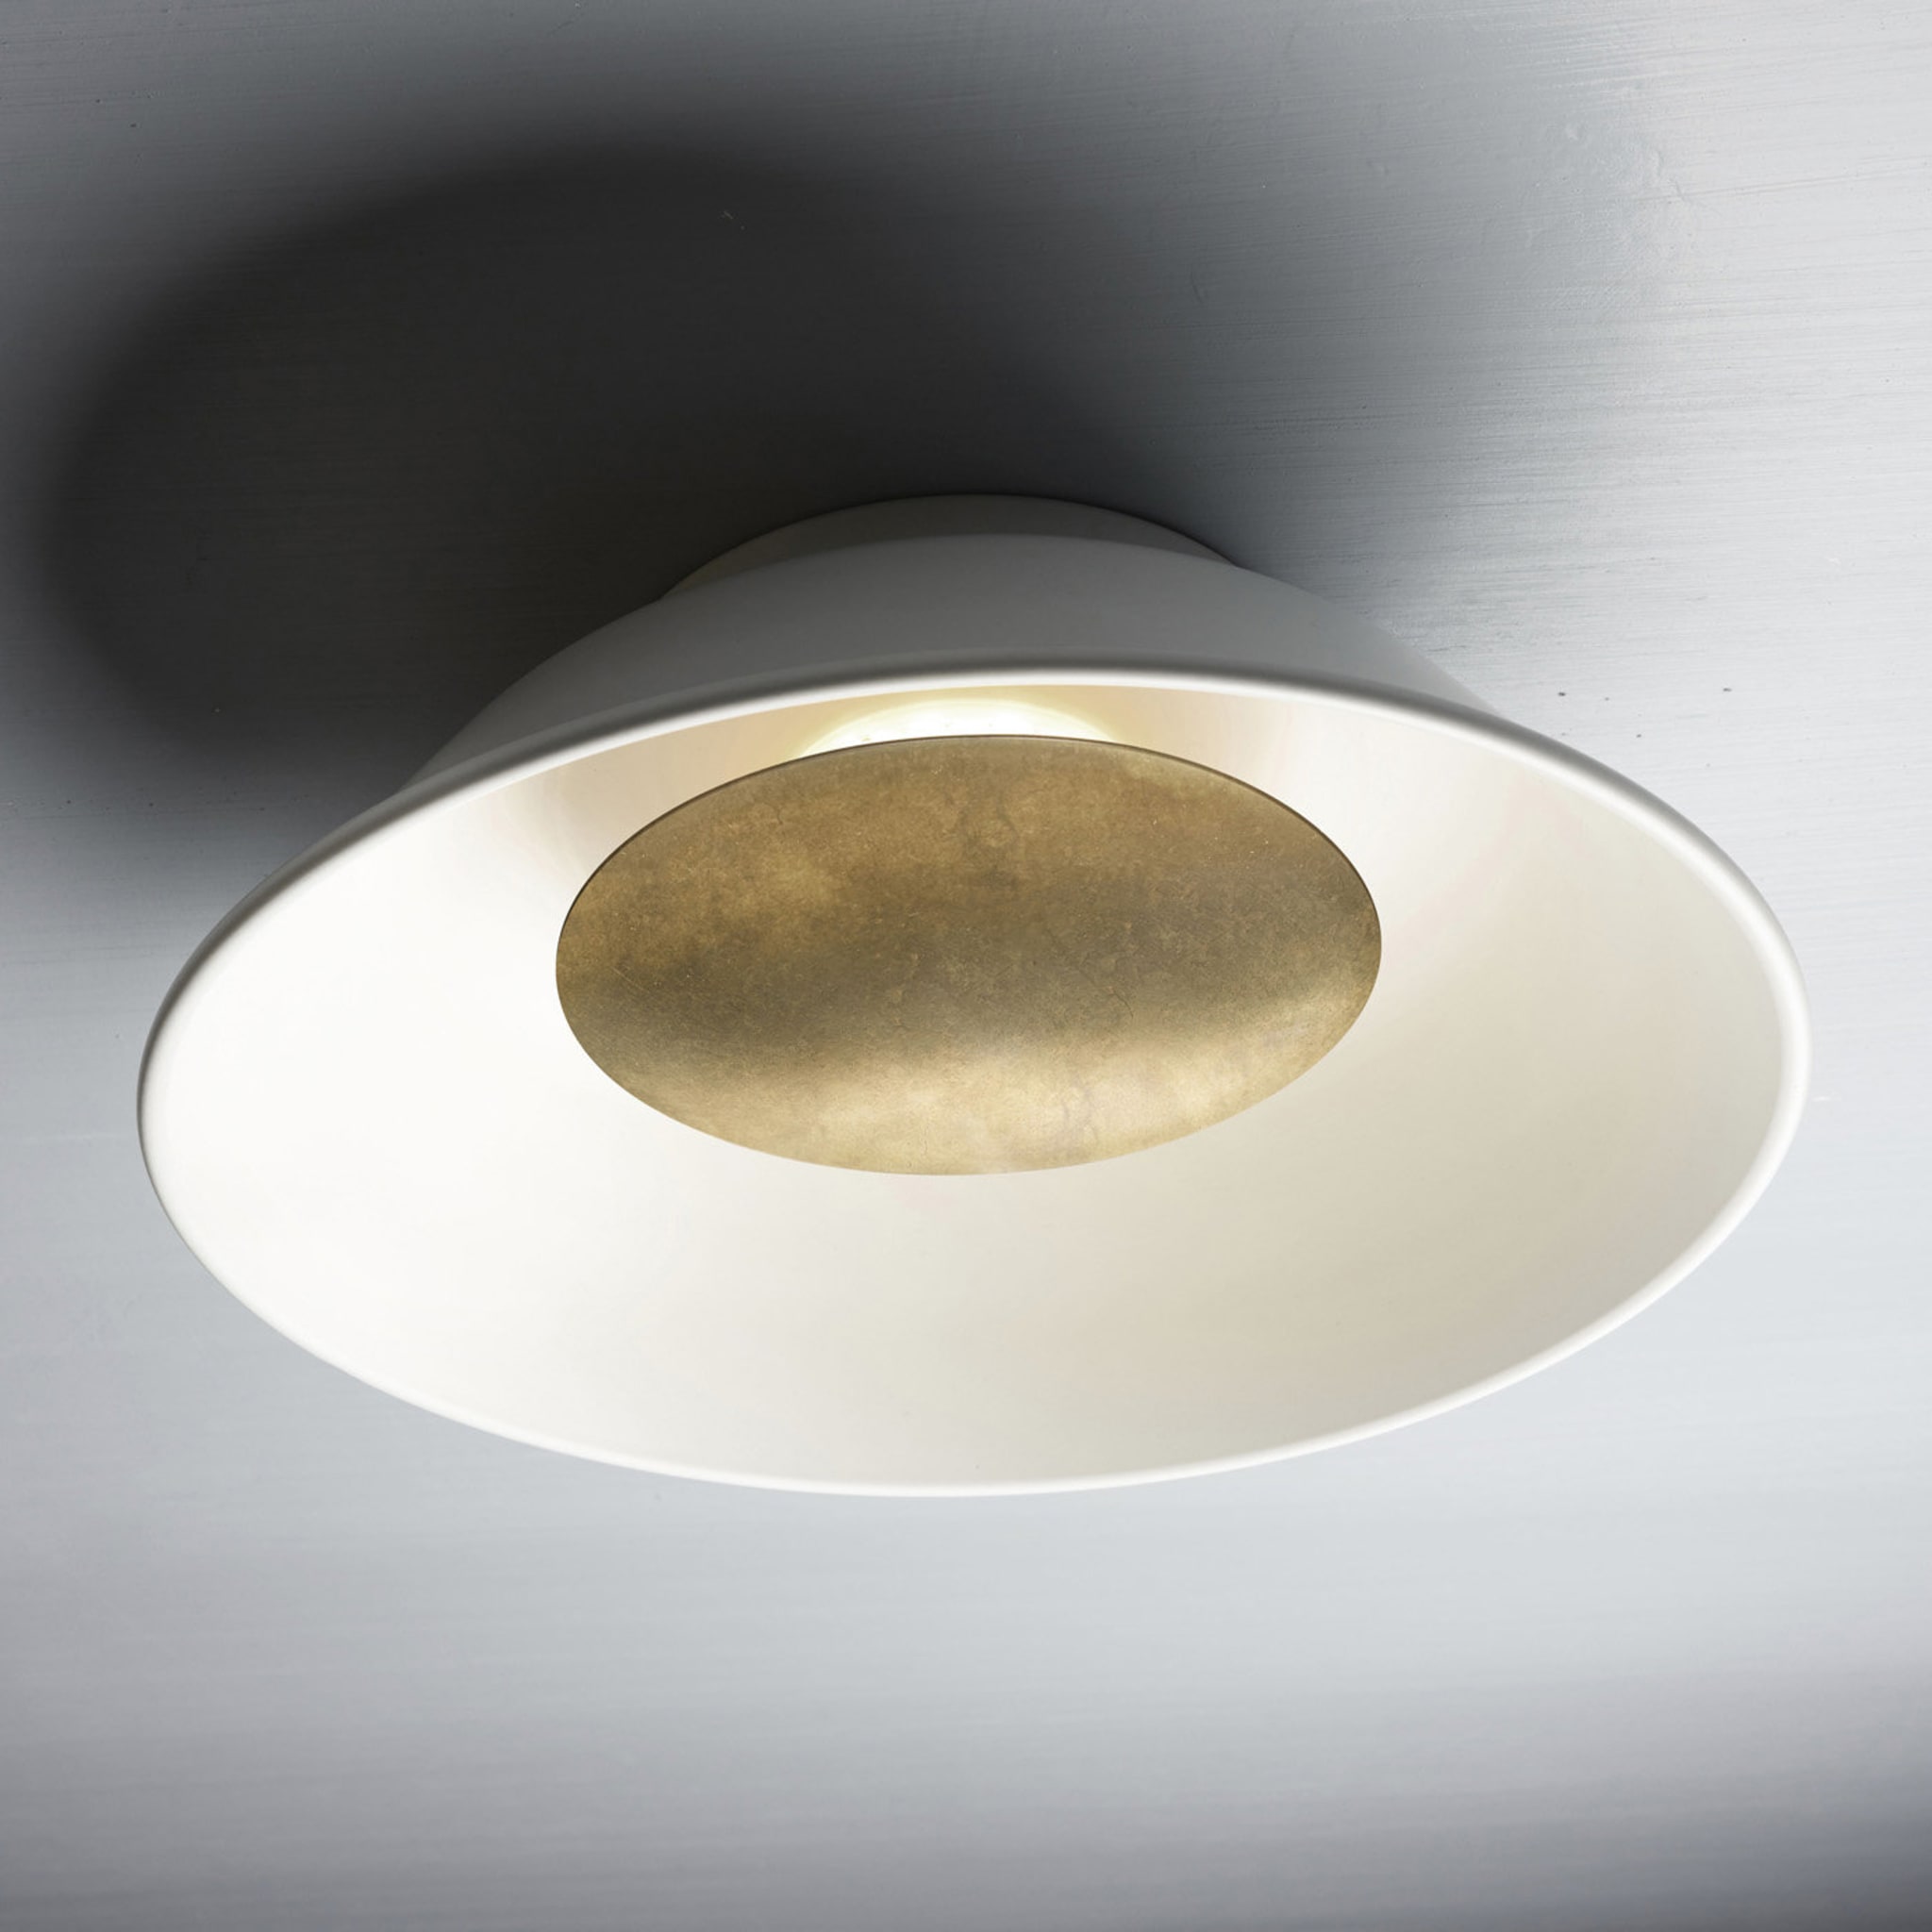 Reverb Ceiling Lamp by Alessandro Zambelli - Alternative view 1